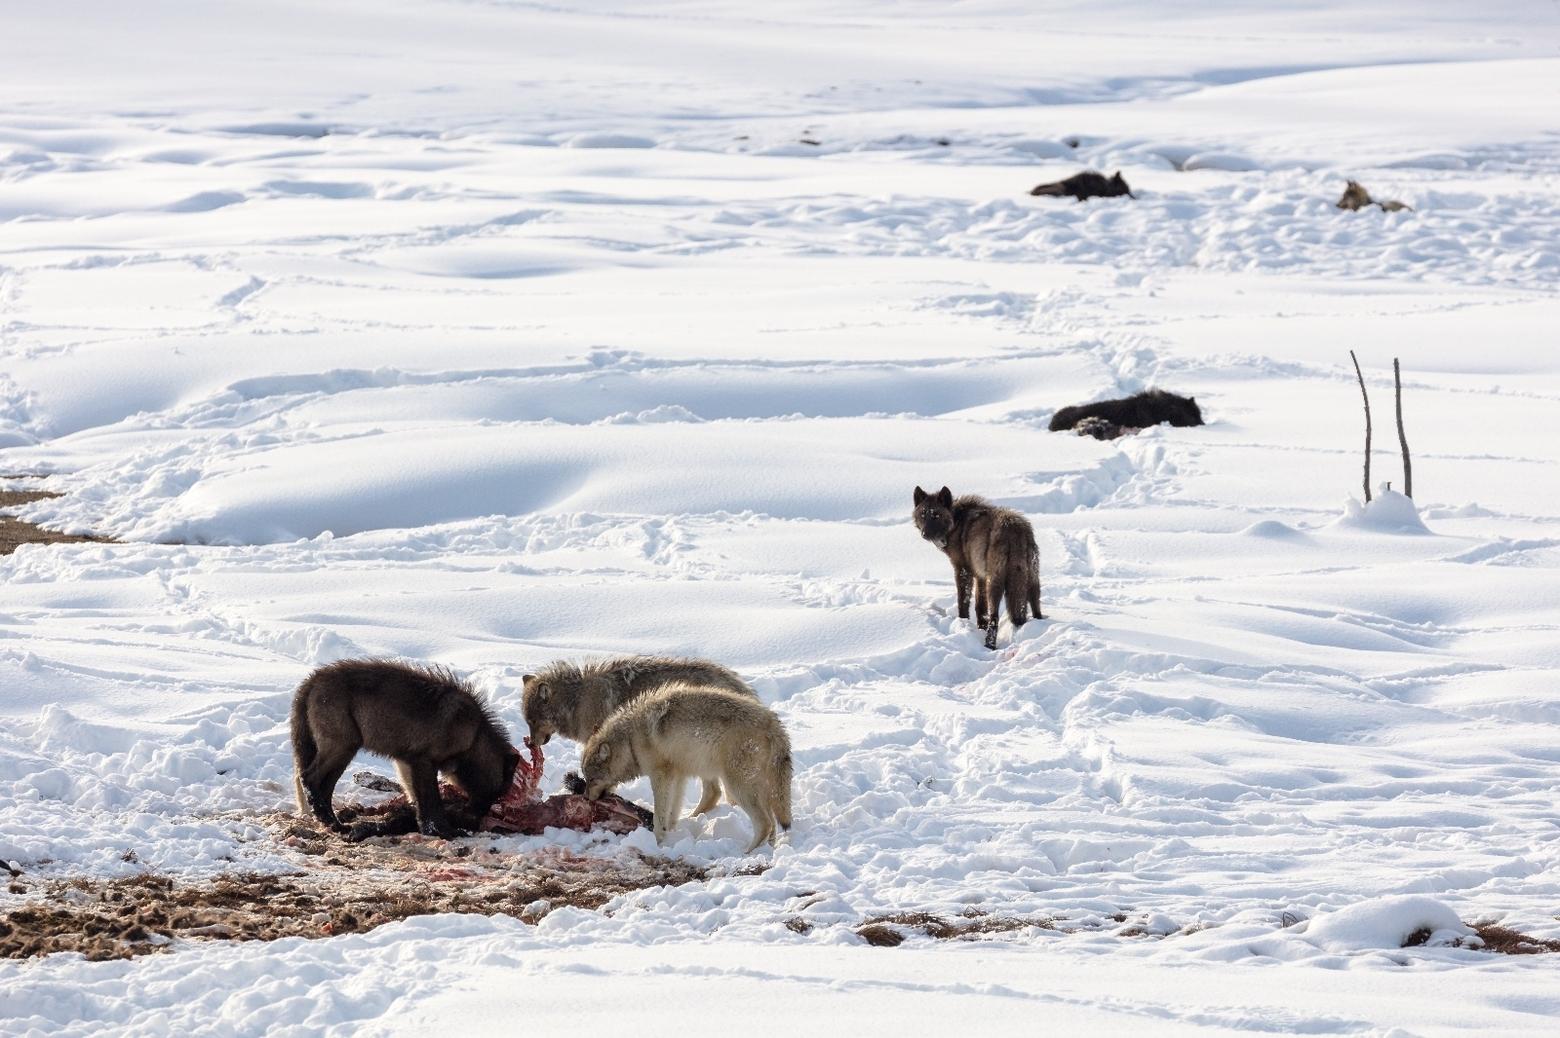 Members of Yellowstone's Wapiti Lake wolf pack on a bison carcass. Wolves also inhabit Tom Miner Basin and the Anderson family is learning new ways every day how to co-exist.  Photo courtesy Jacob W. Frank/NPS